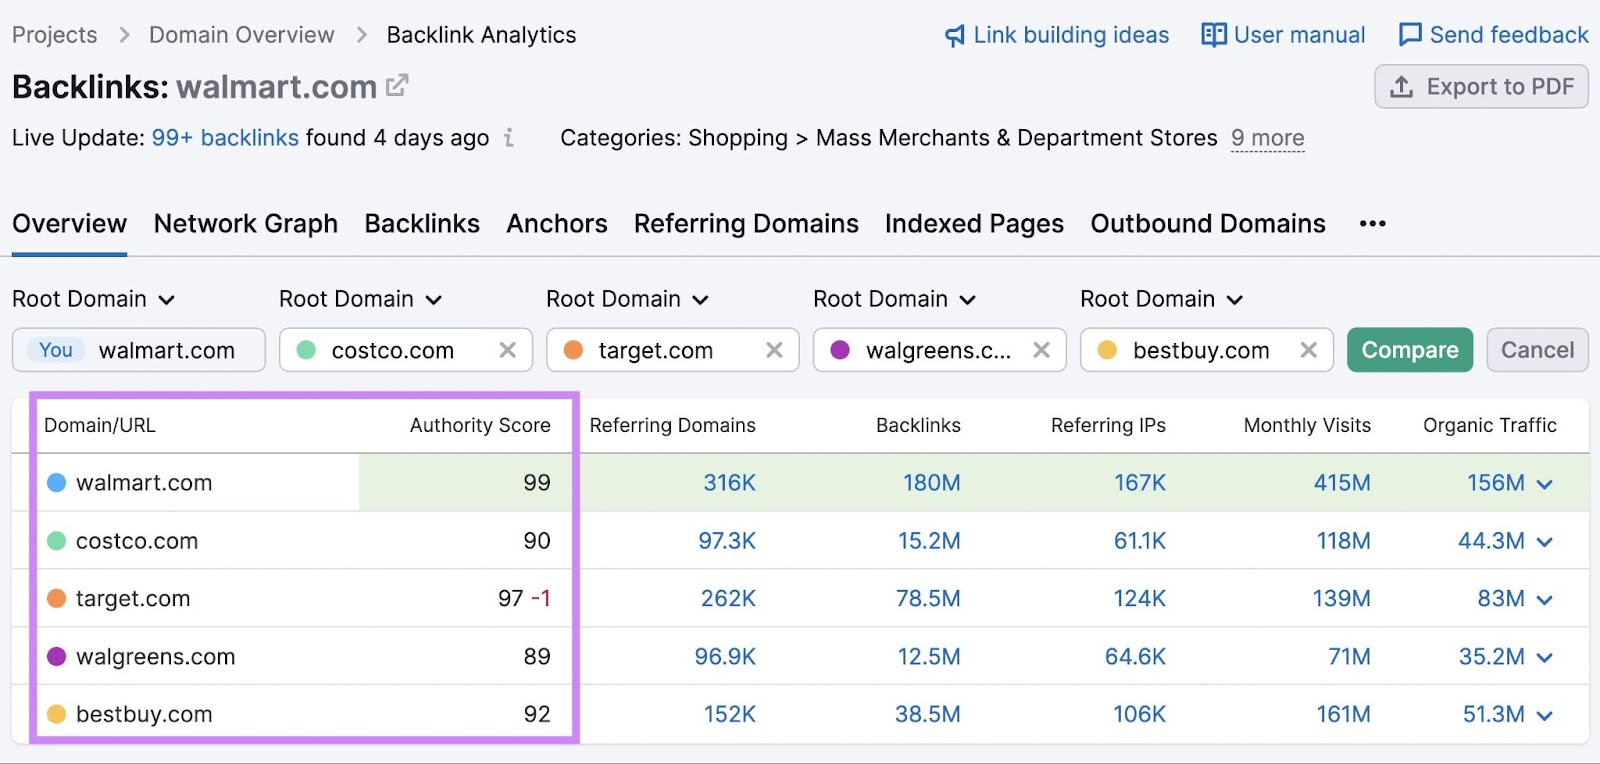 Backlink Analytics overview report section